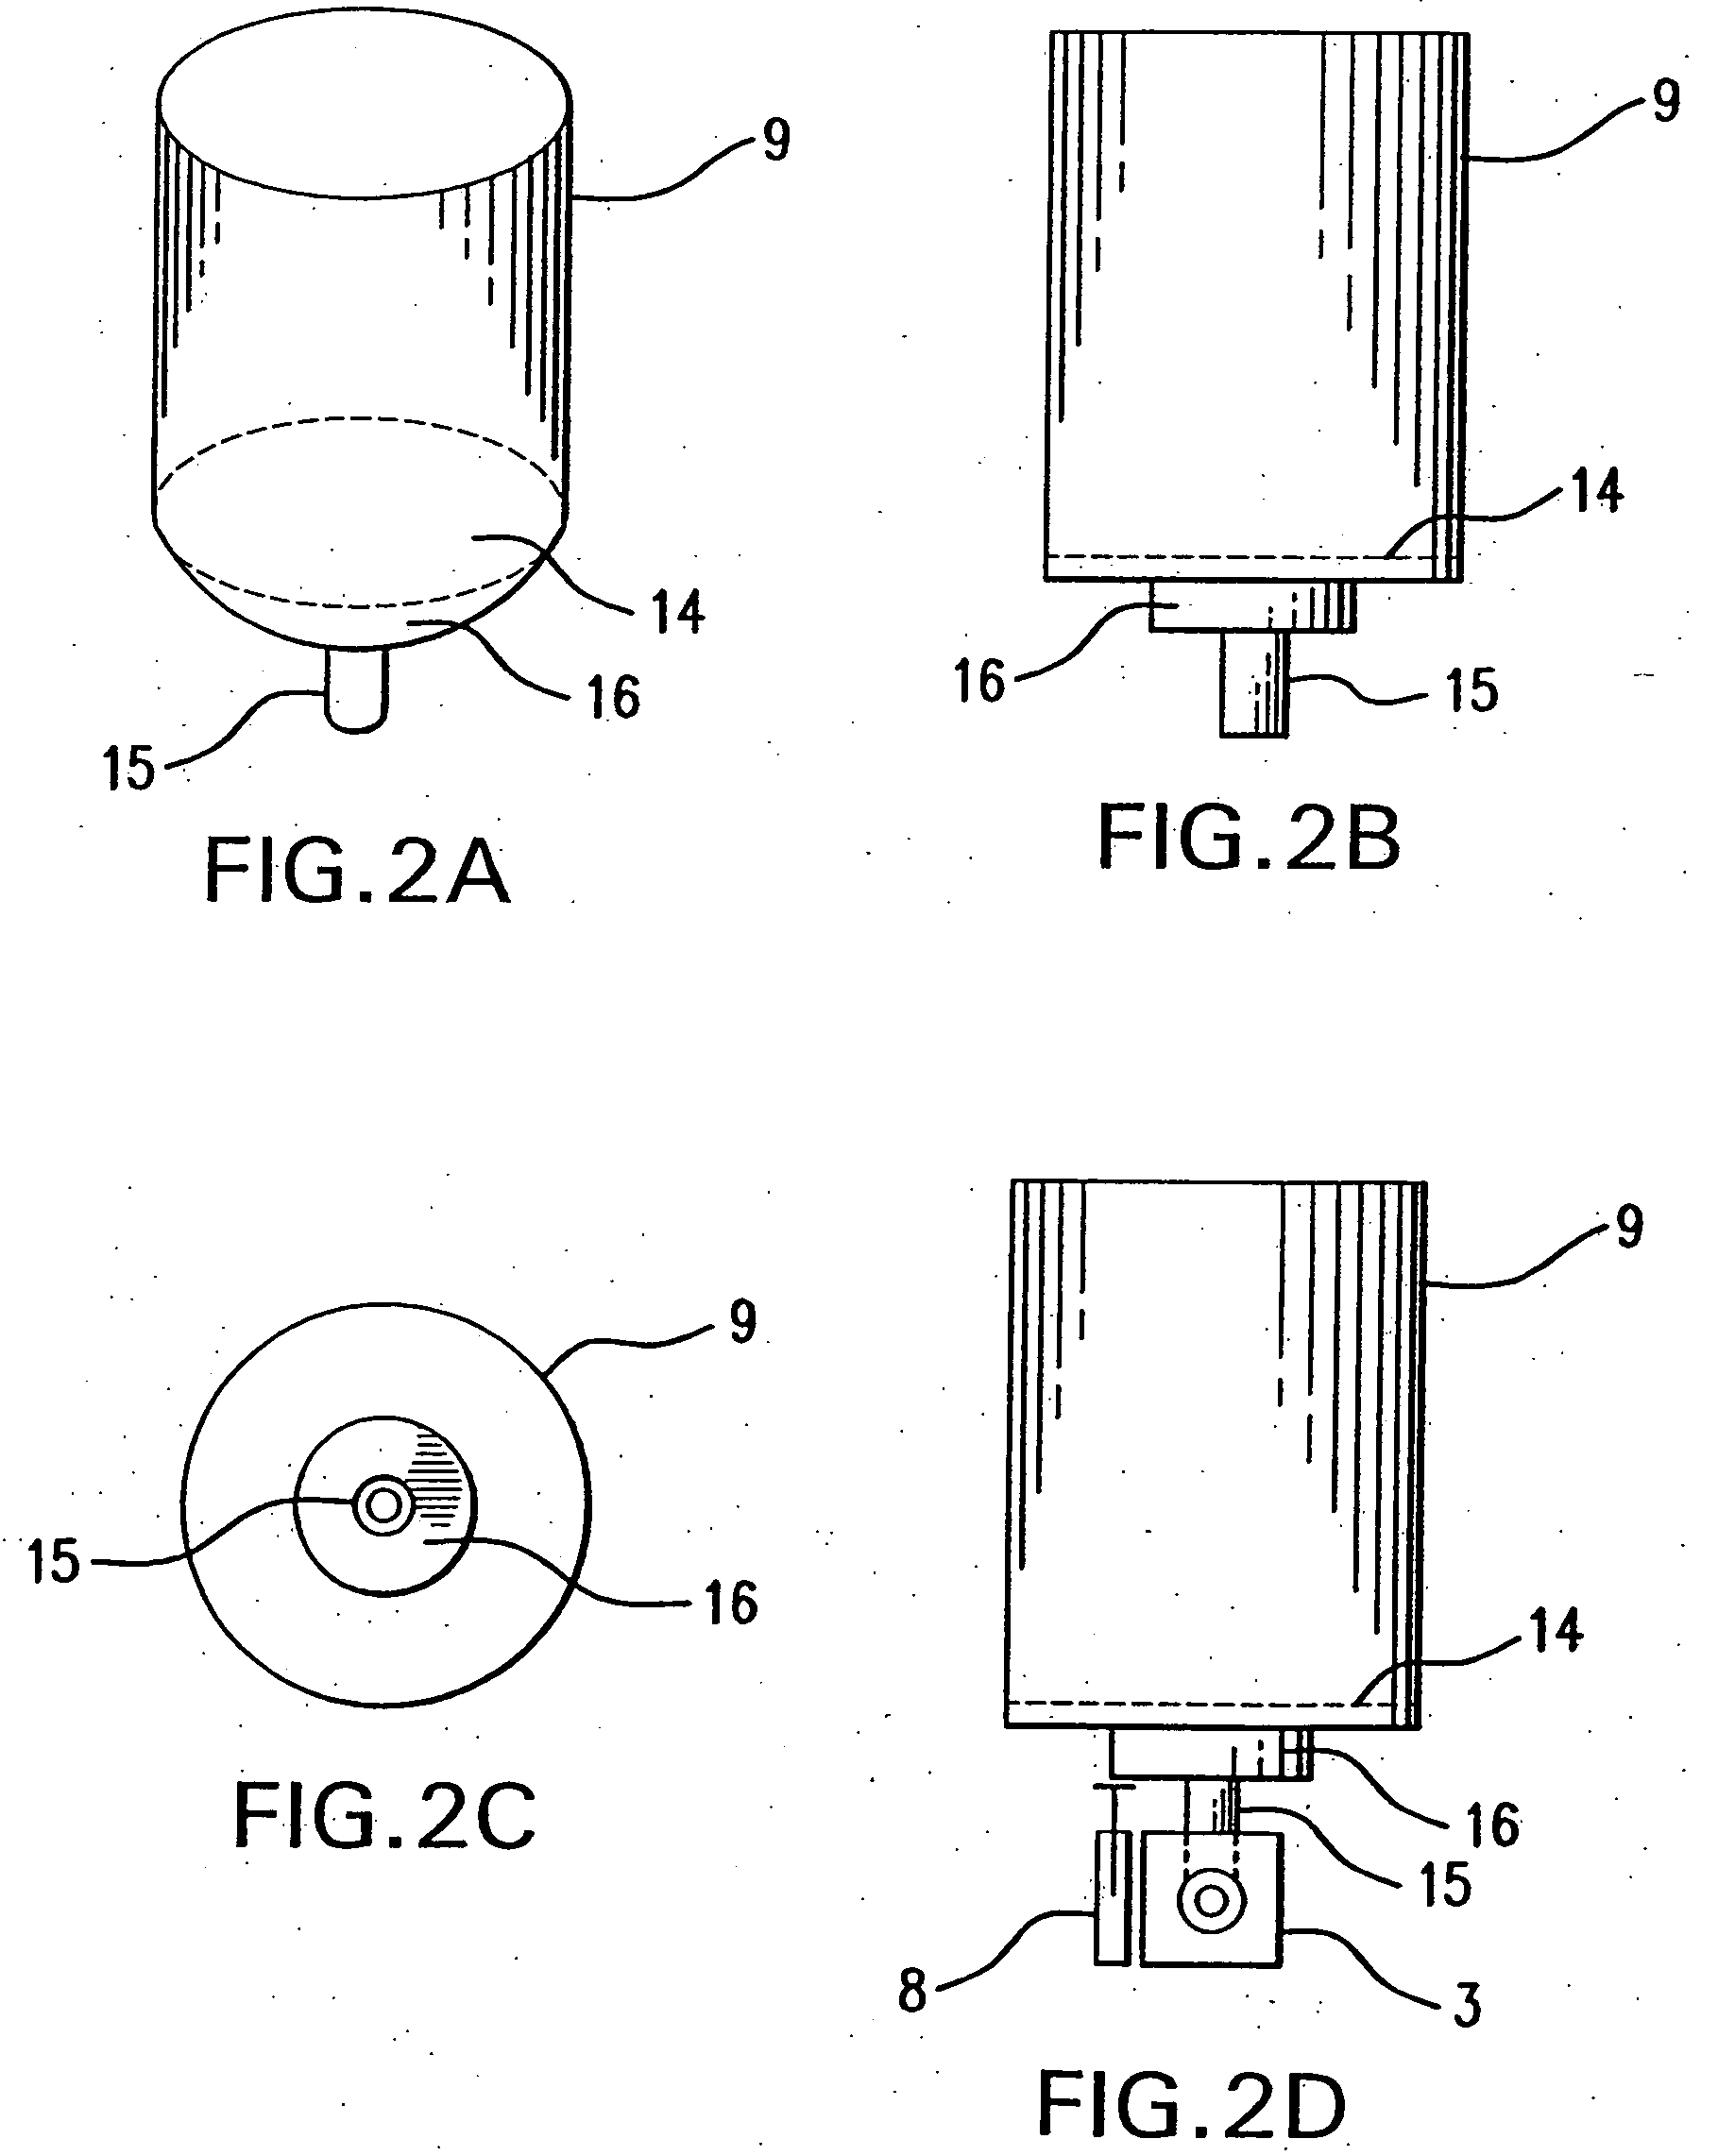 Inhalation device and system for the remote monitoring of drug administration